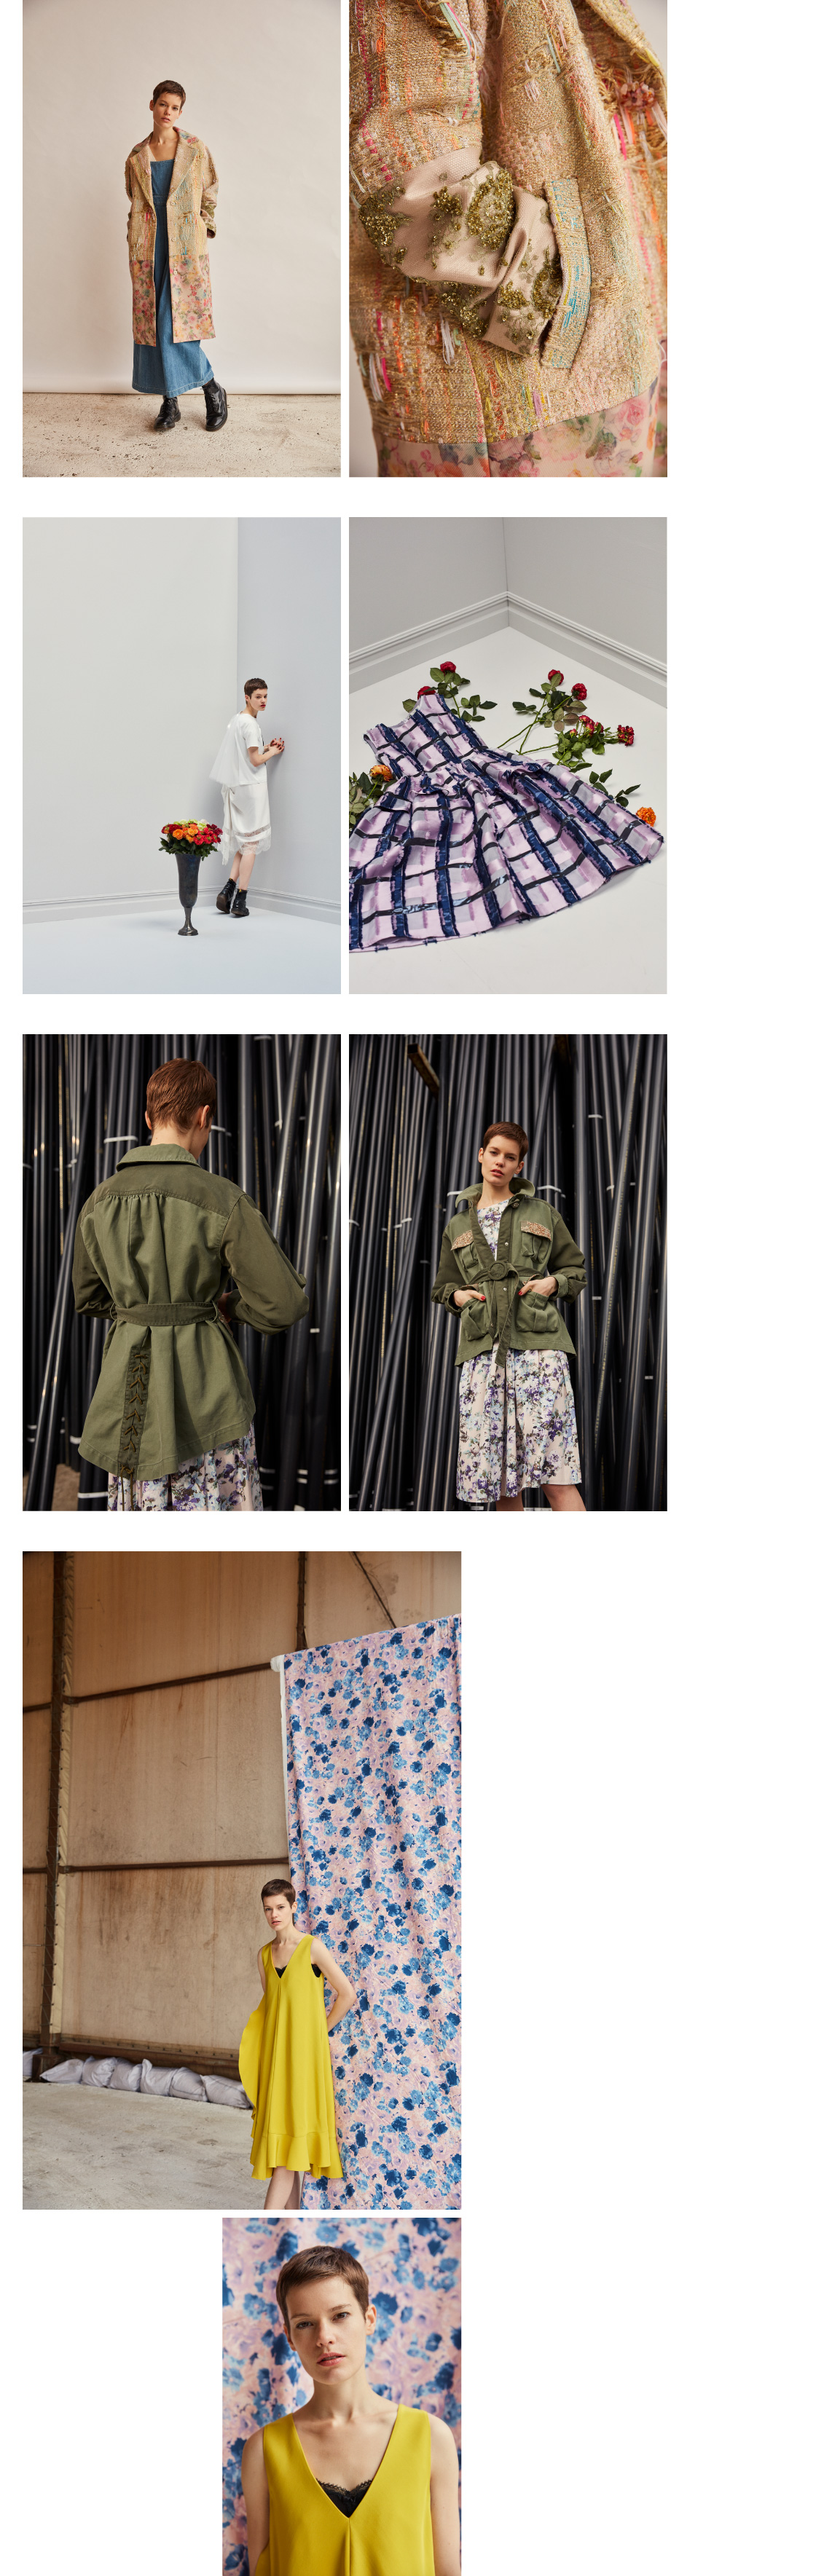 leur logette/ルール ロジェット Collection Image04